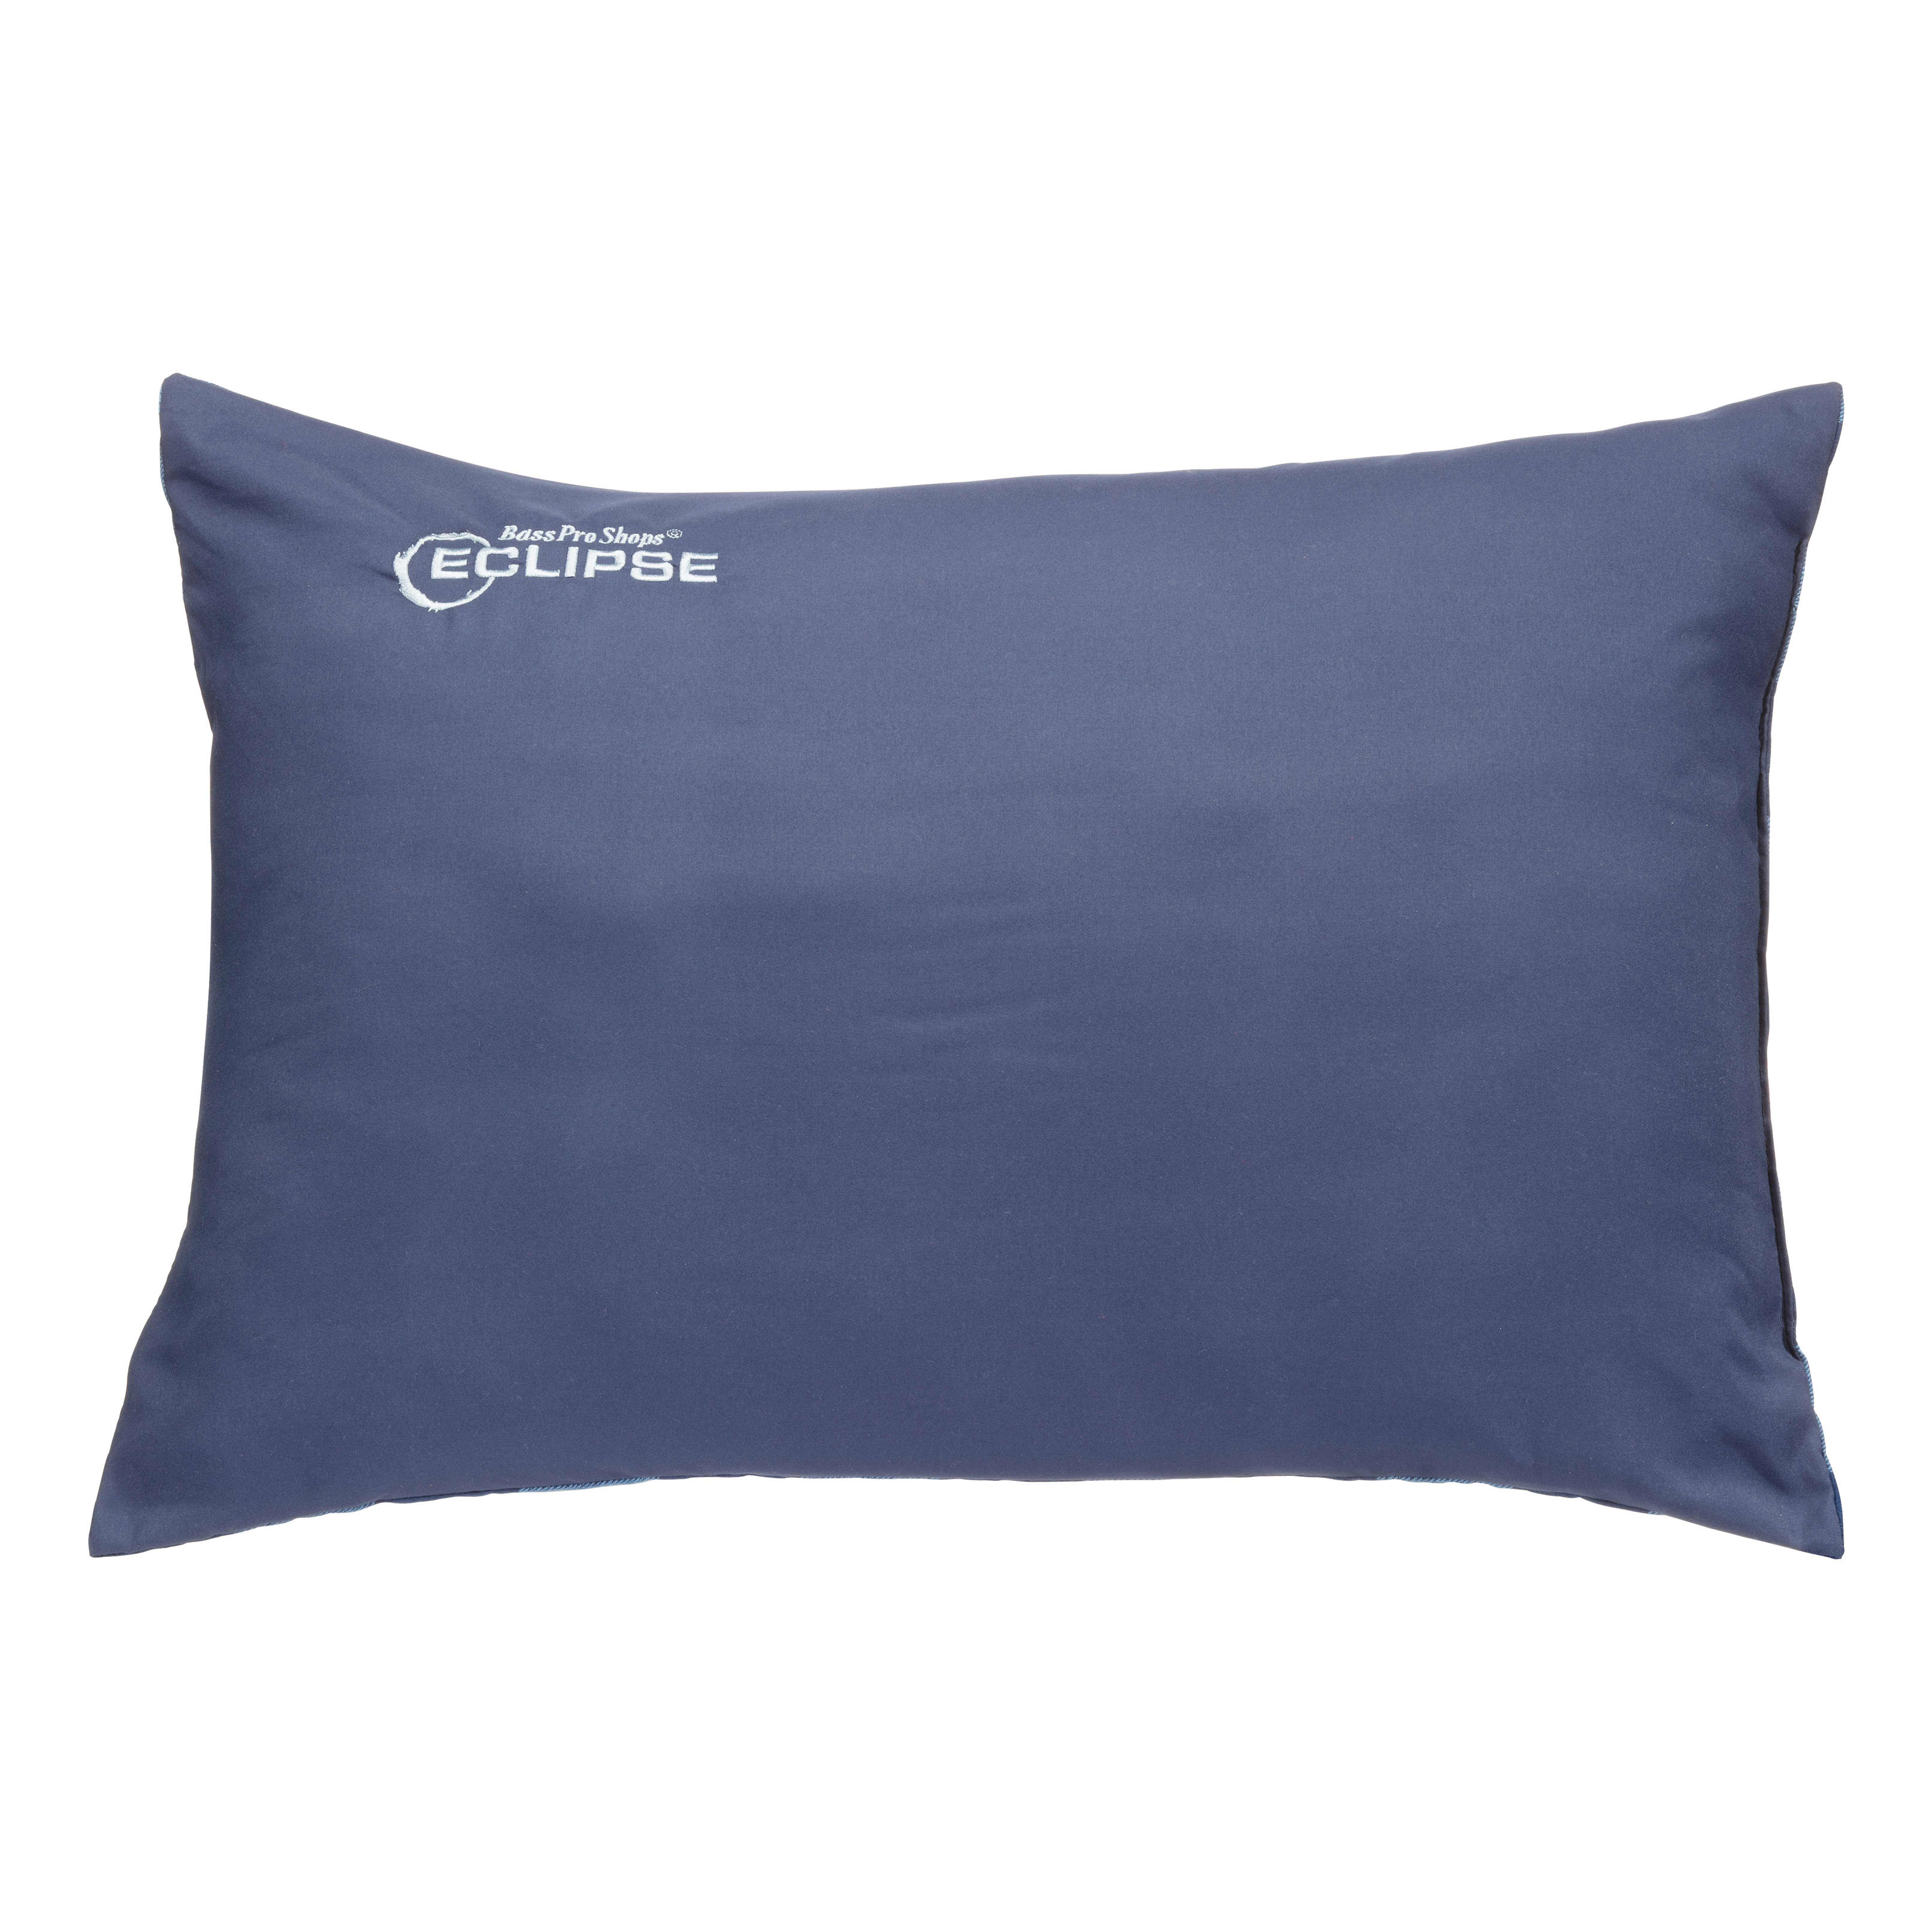 Bass Pro Shops® Eclipse™ Deluxe Camp Pillow - Peacoat Navy